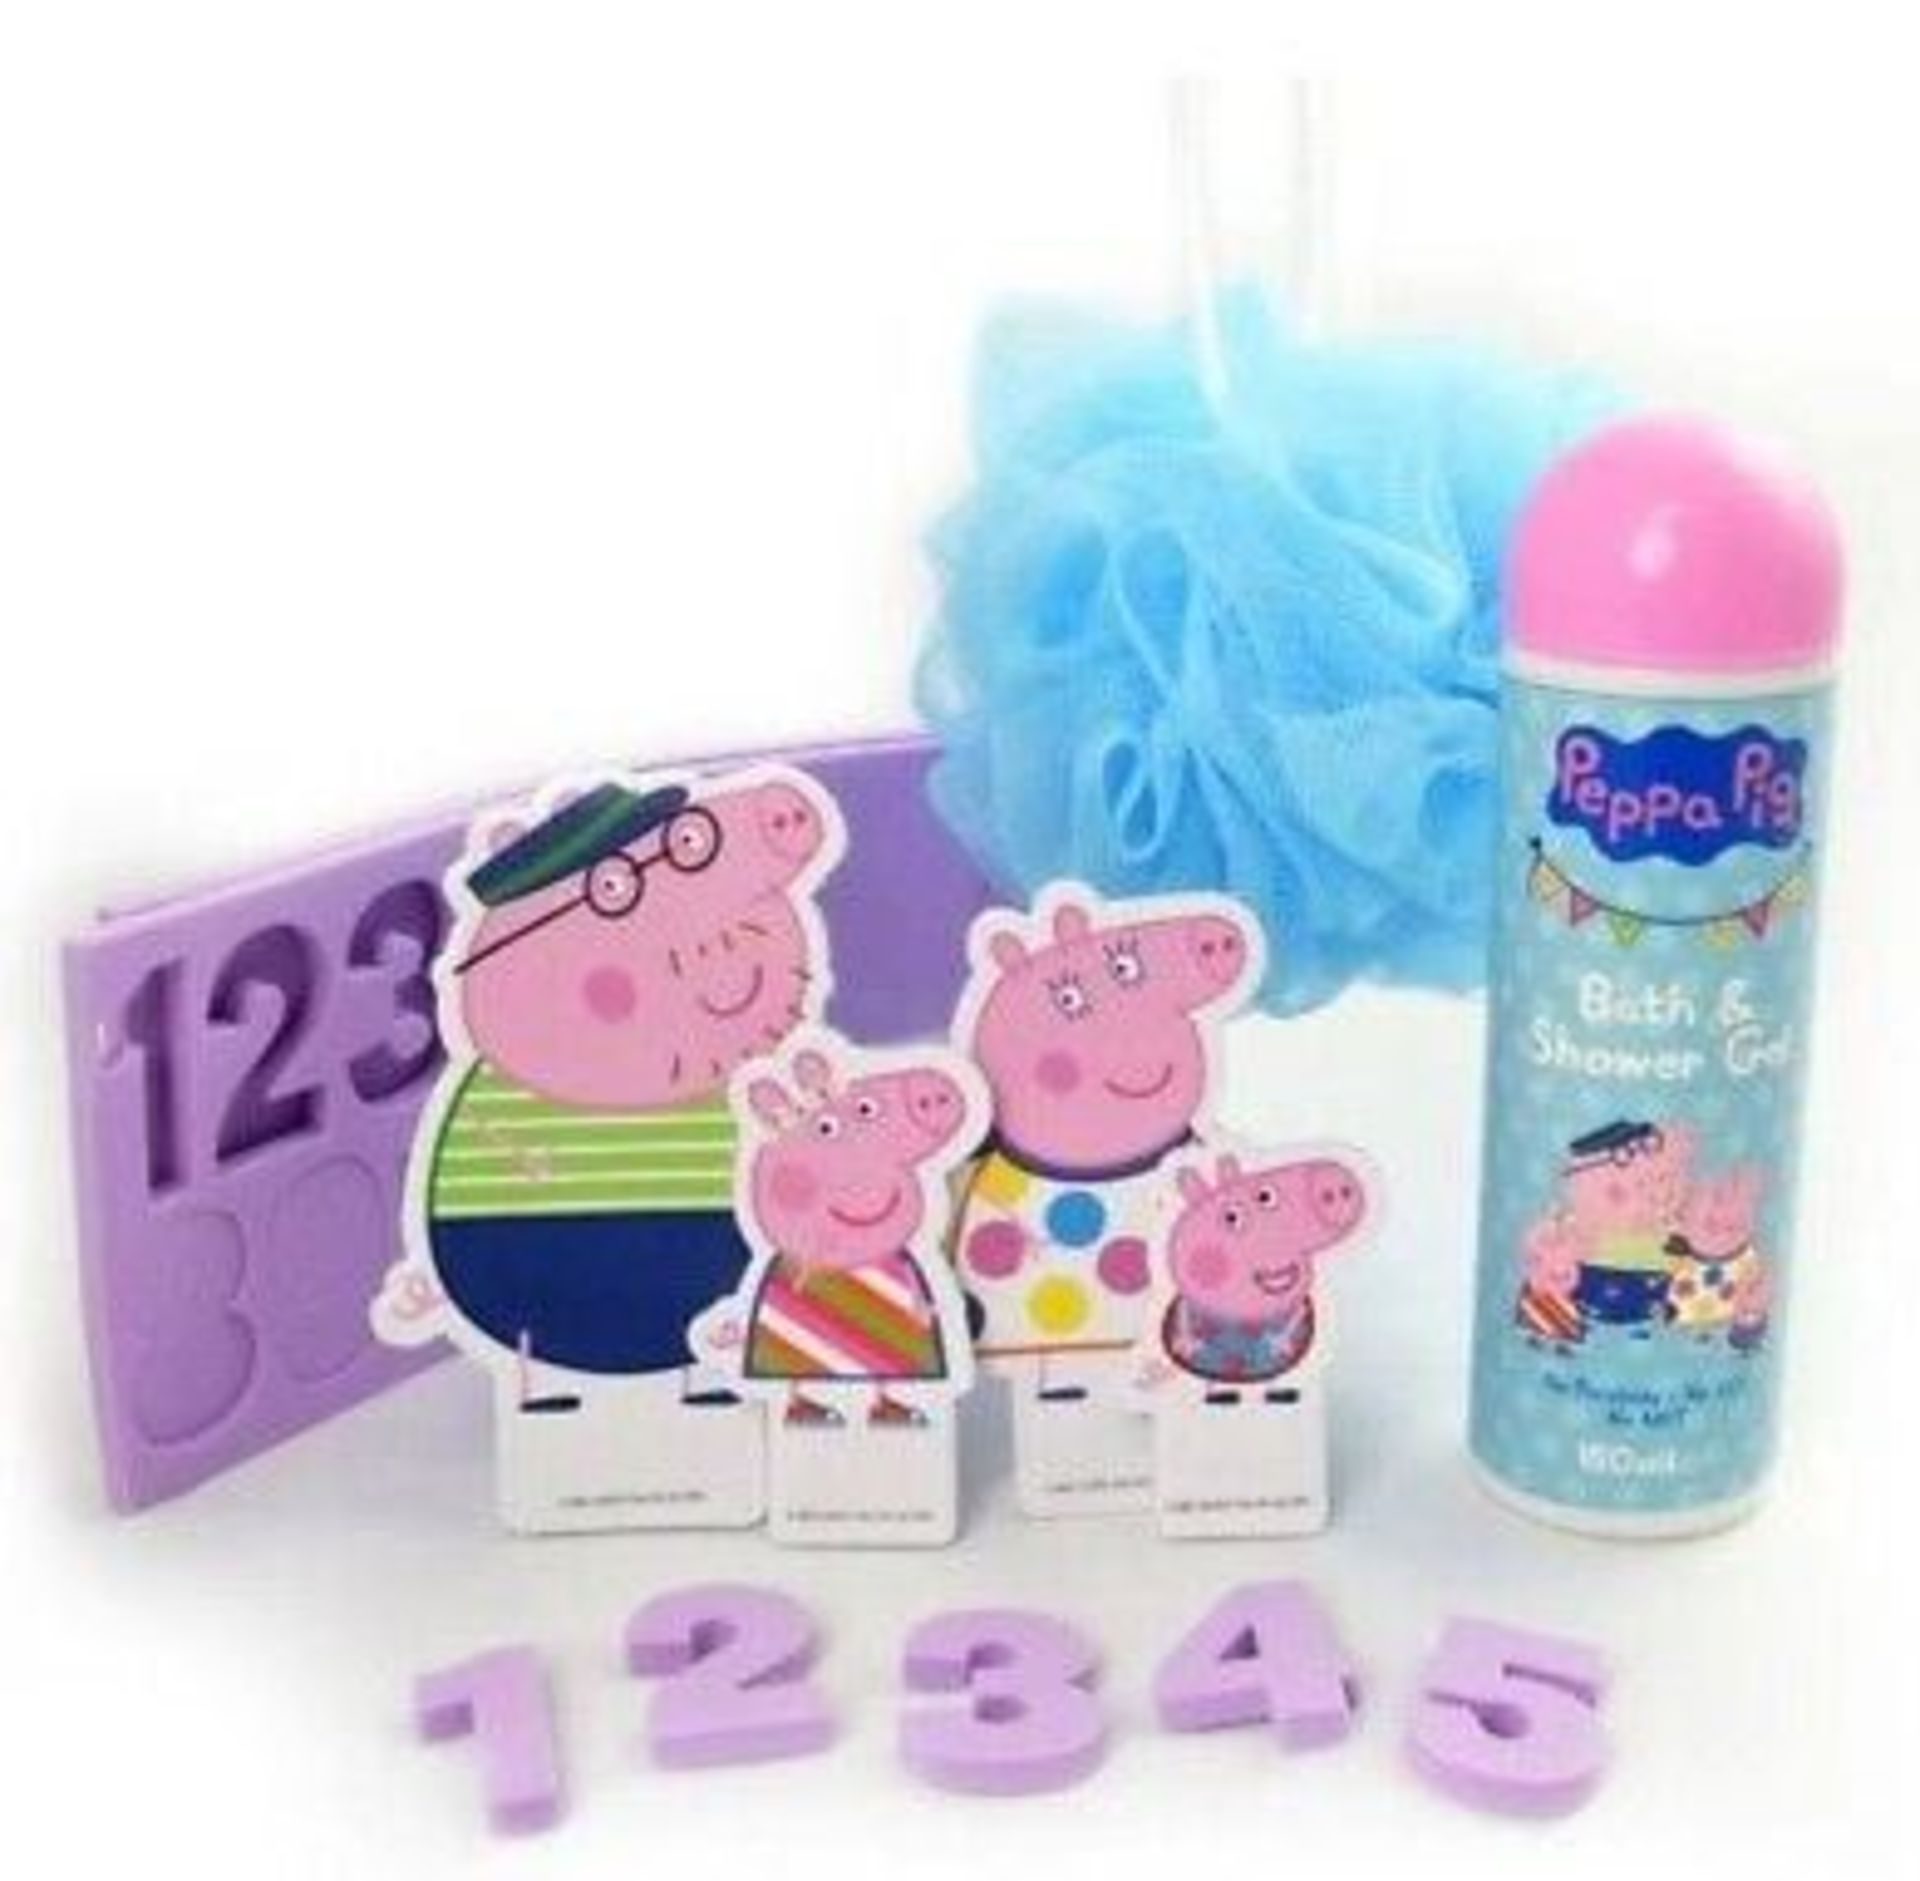 30 x Peppa Pig Campervan Bath Sets (with cut-out Peppa Pig characters, bath numbers, - Image 3 of 3